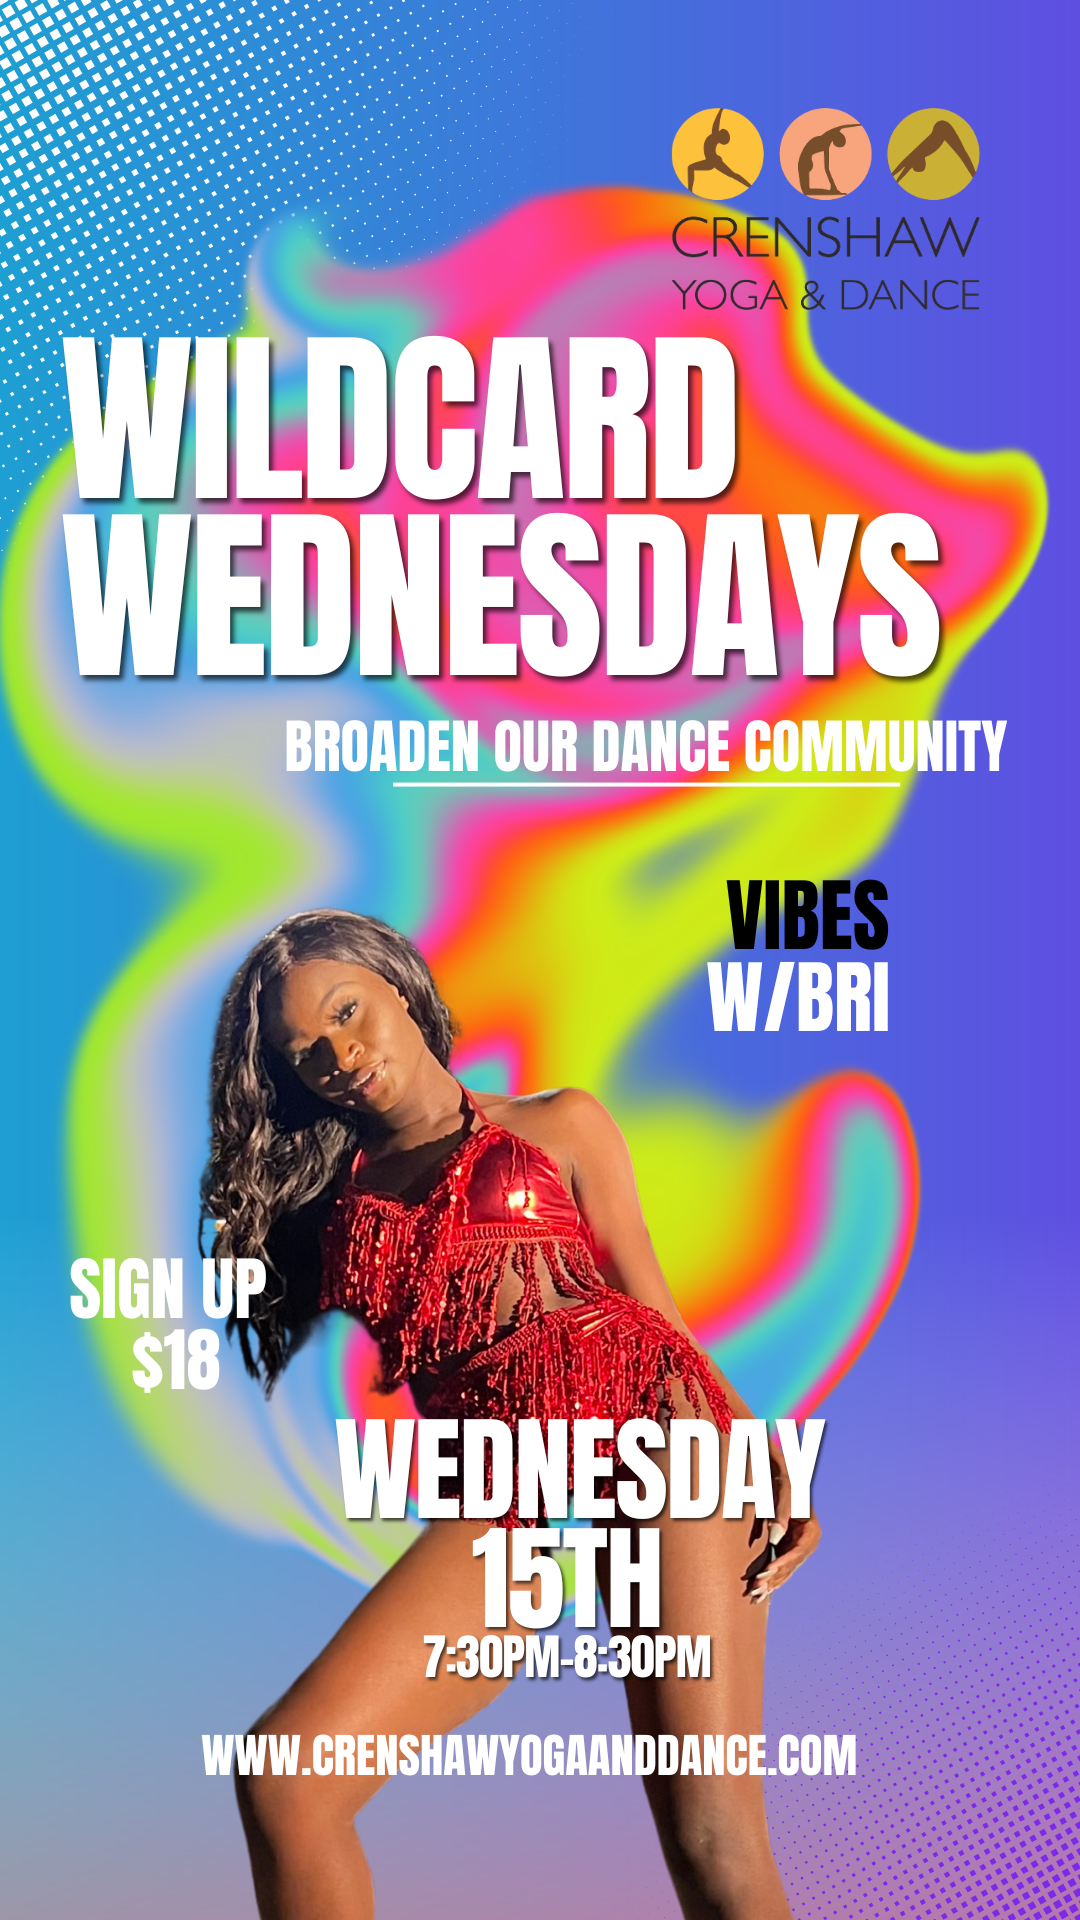 Get your Vibes by Bri Wednesday, May 15th 7:30pm. $18